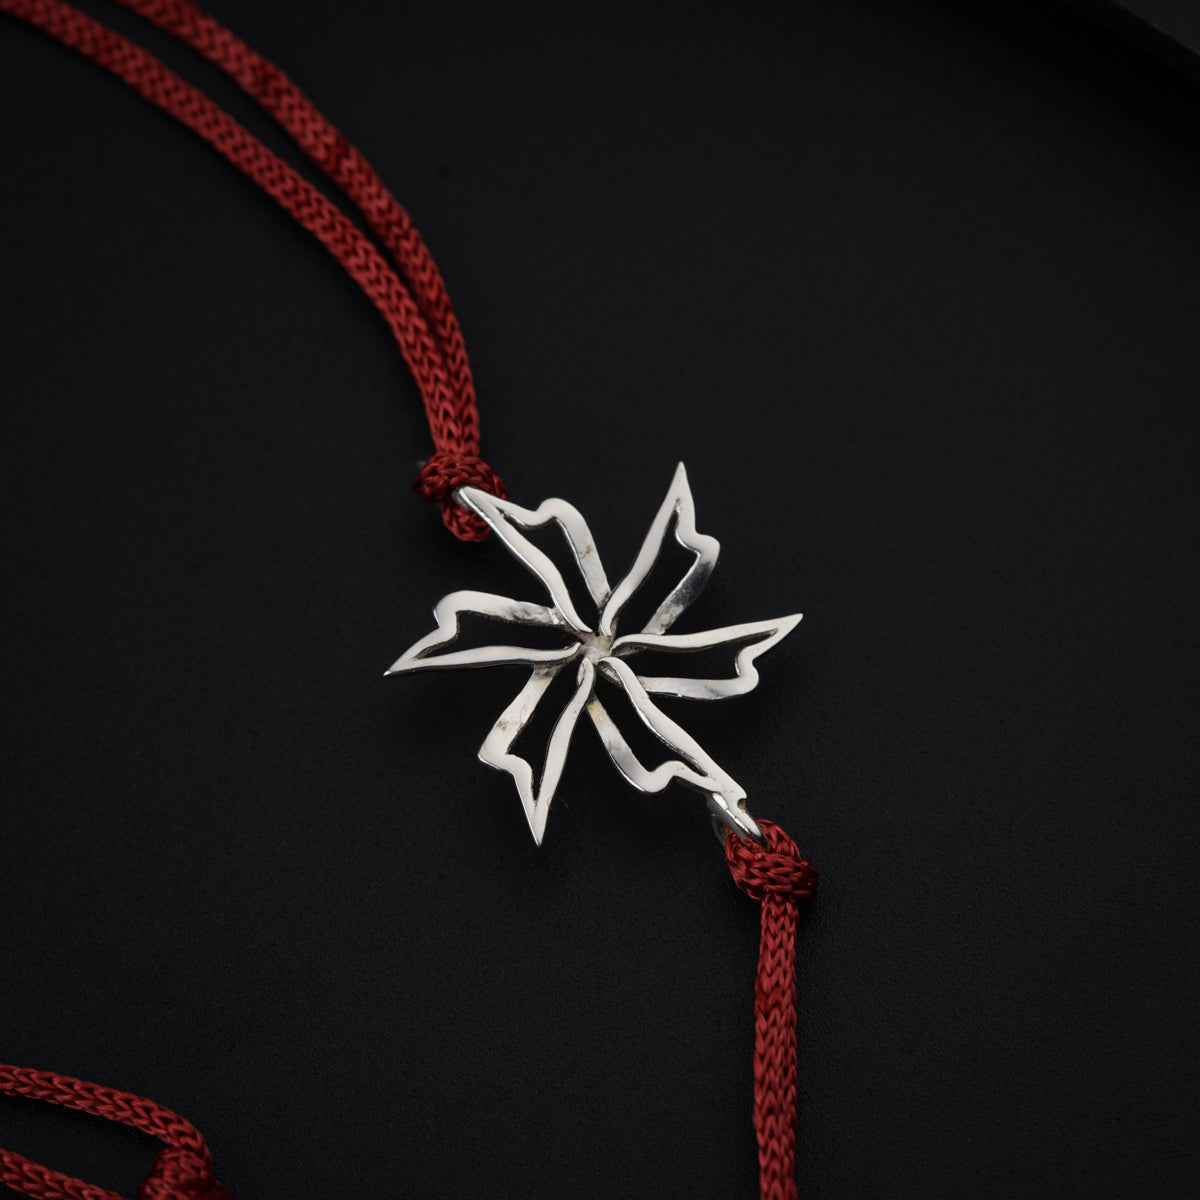 a silver snowflake on a red string